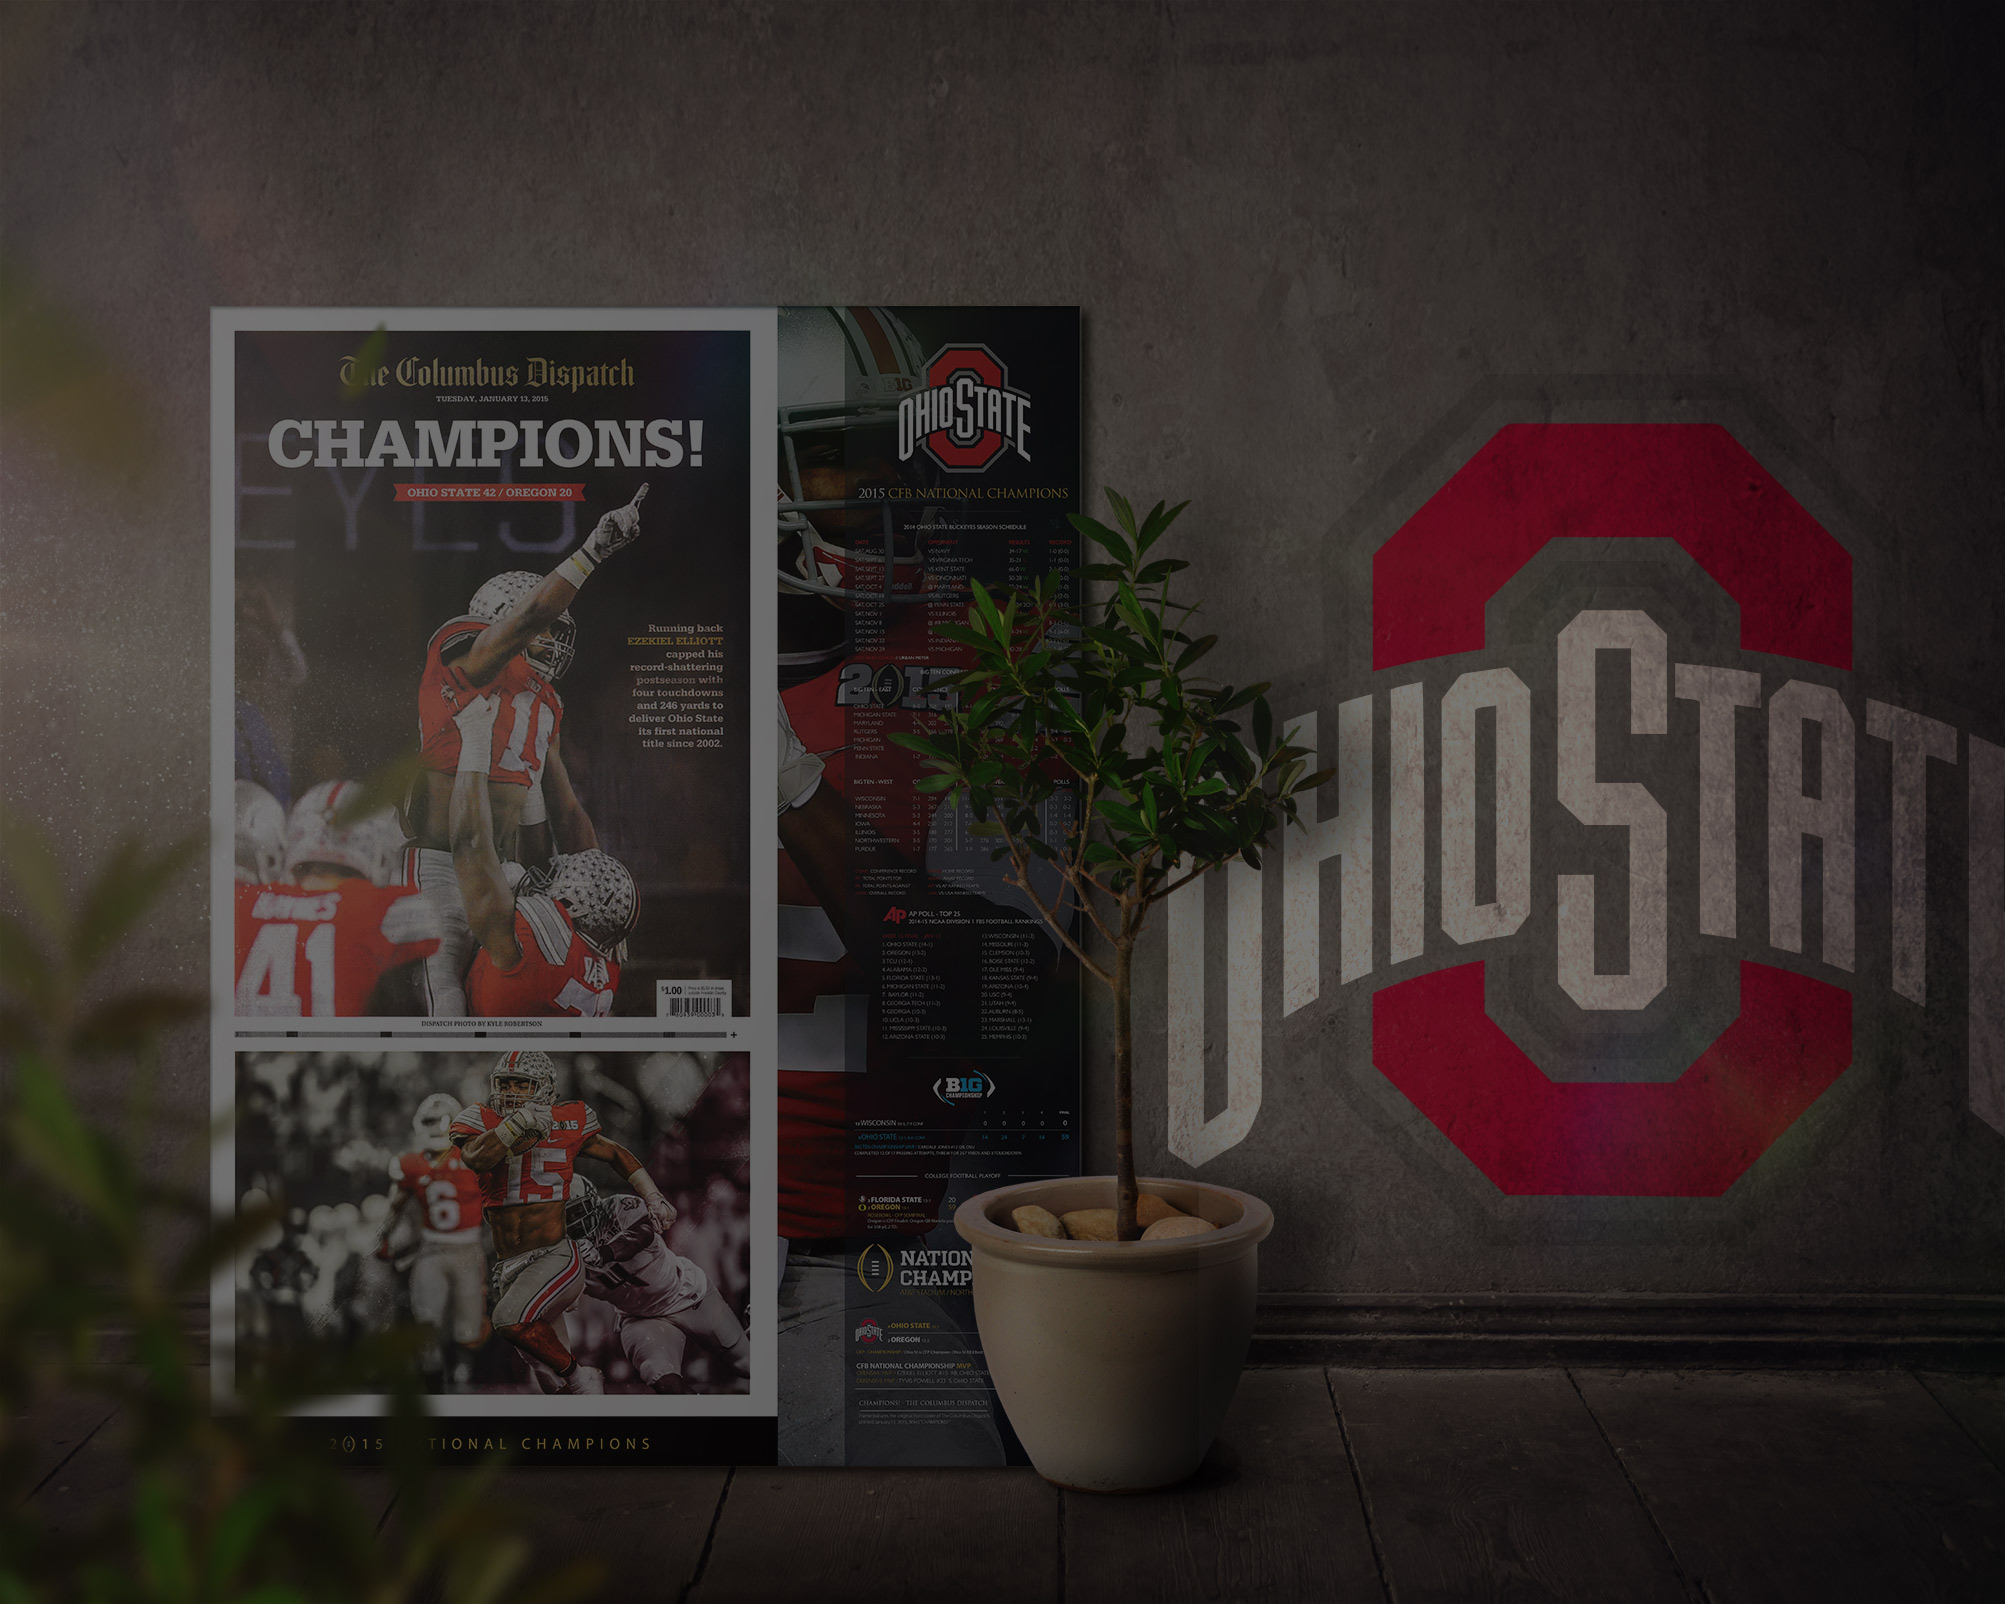 Shop Glass Frames, Sports Memorabilia, Cavs, Cubs, Indians, Ohio State Buckeyes